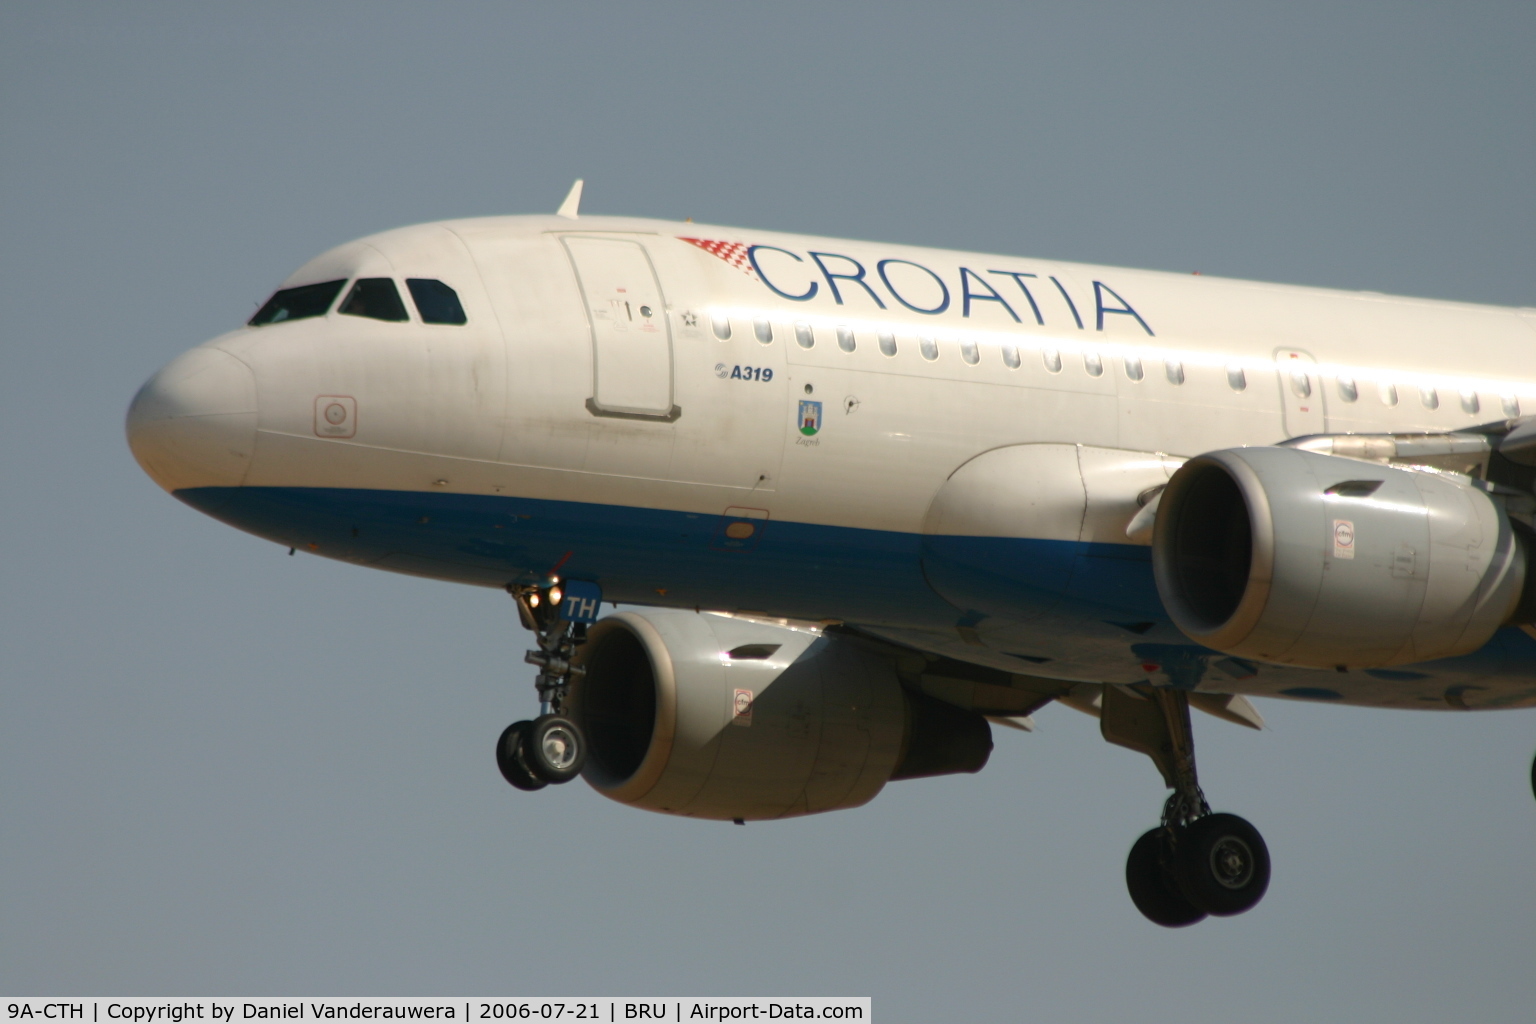 9A-CTH, 1998 Airbus A319-112 C/N 833, ZAGREB is about to land on rwy 25L